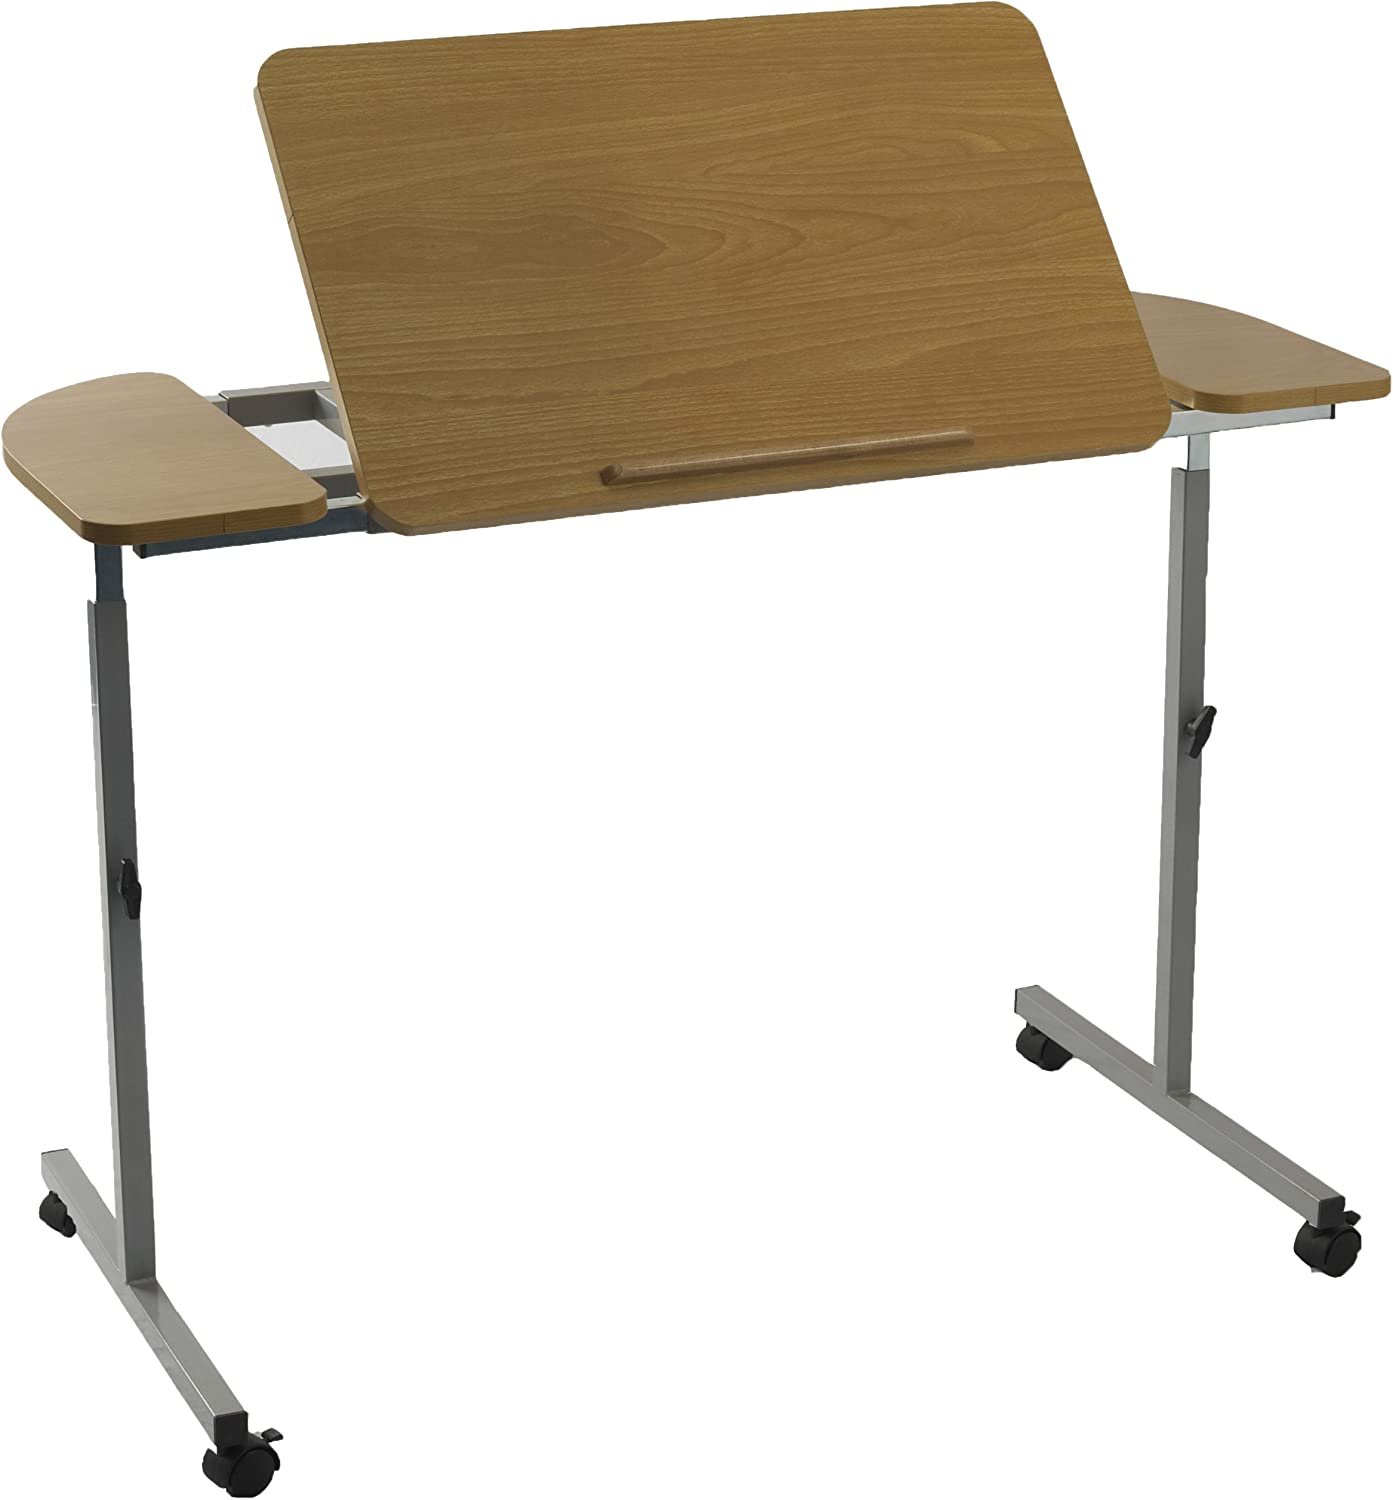 NRS Healthcare M66832 Wheeled and Tilting Over Bed or Chair Table